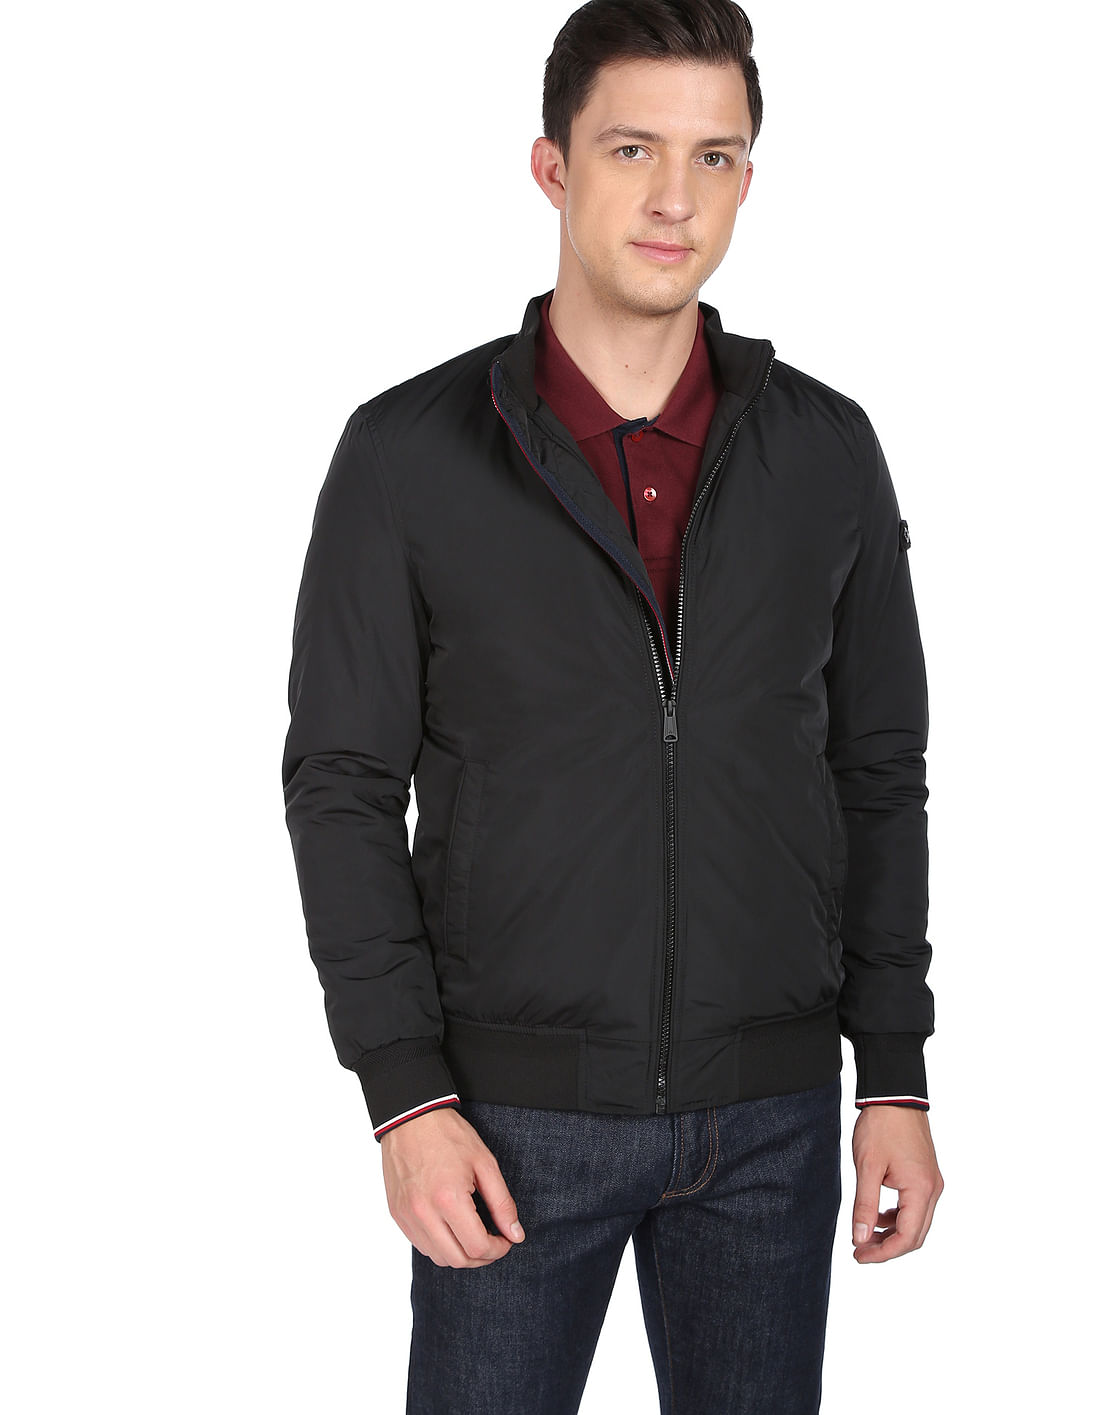 Buy Arrow Sports Stand Collar Solid Jacket - NNNOW.com